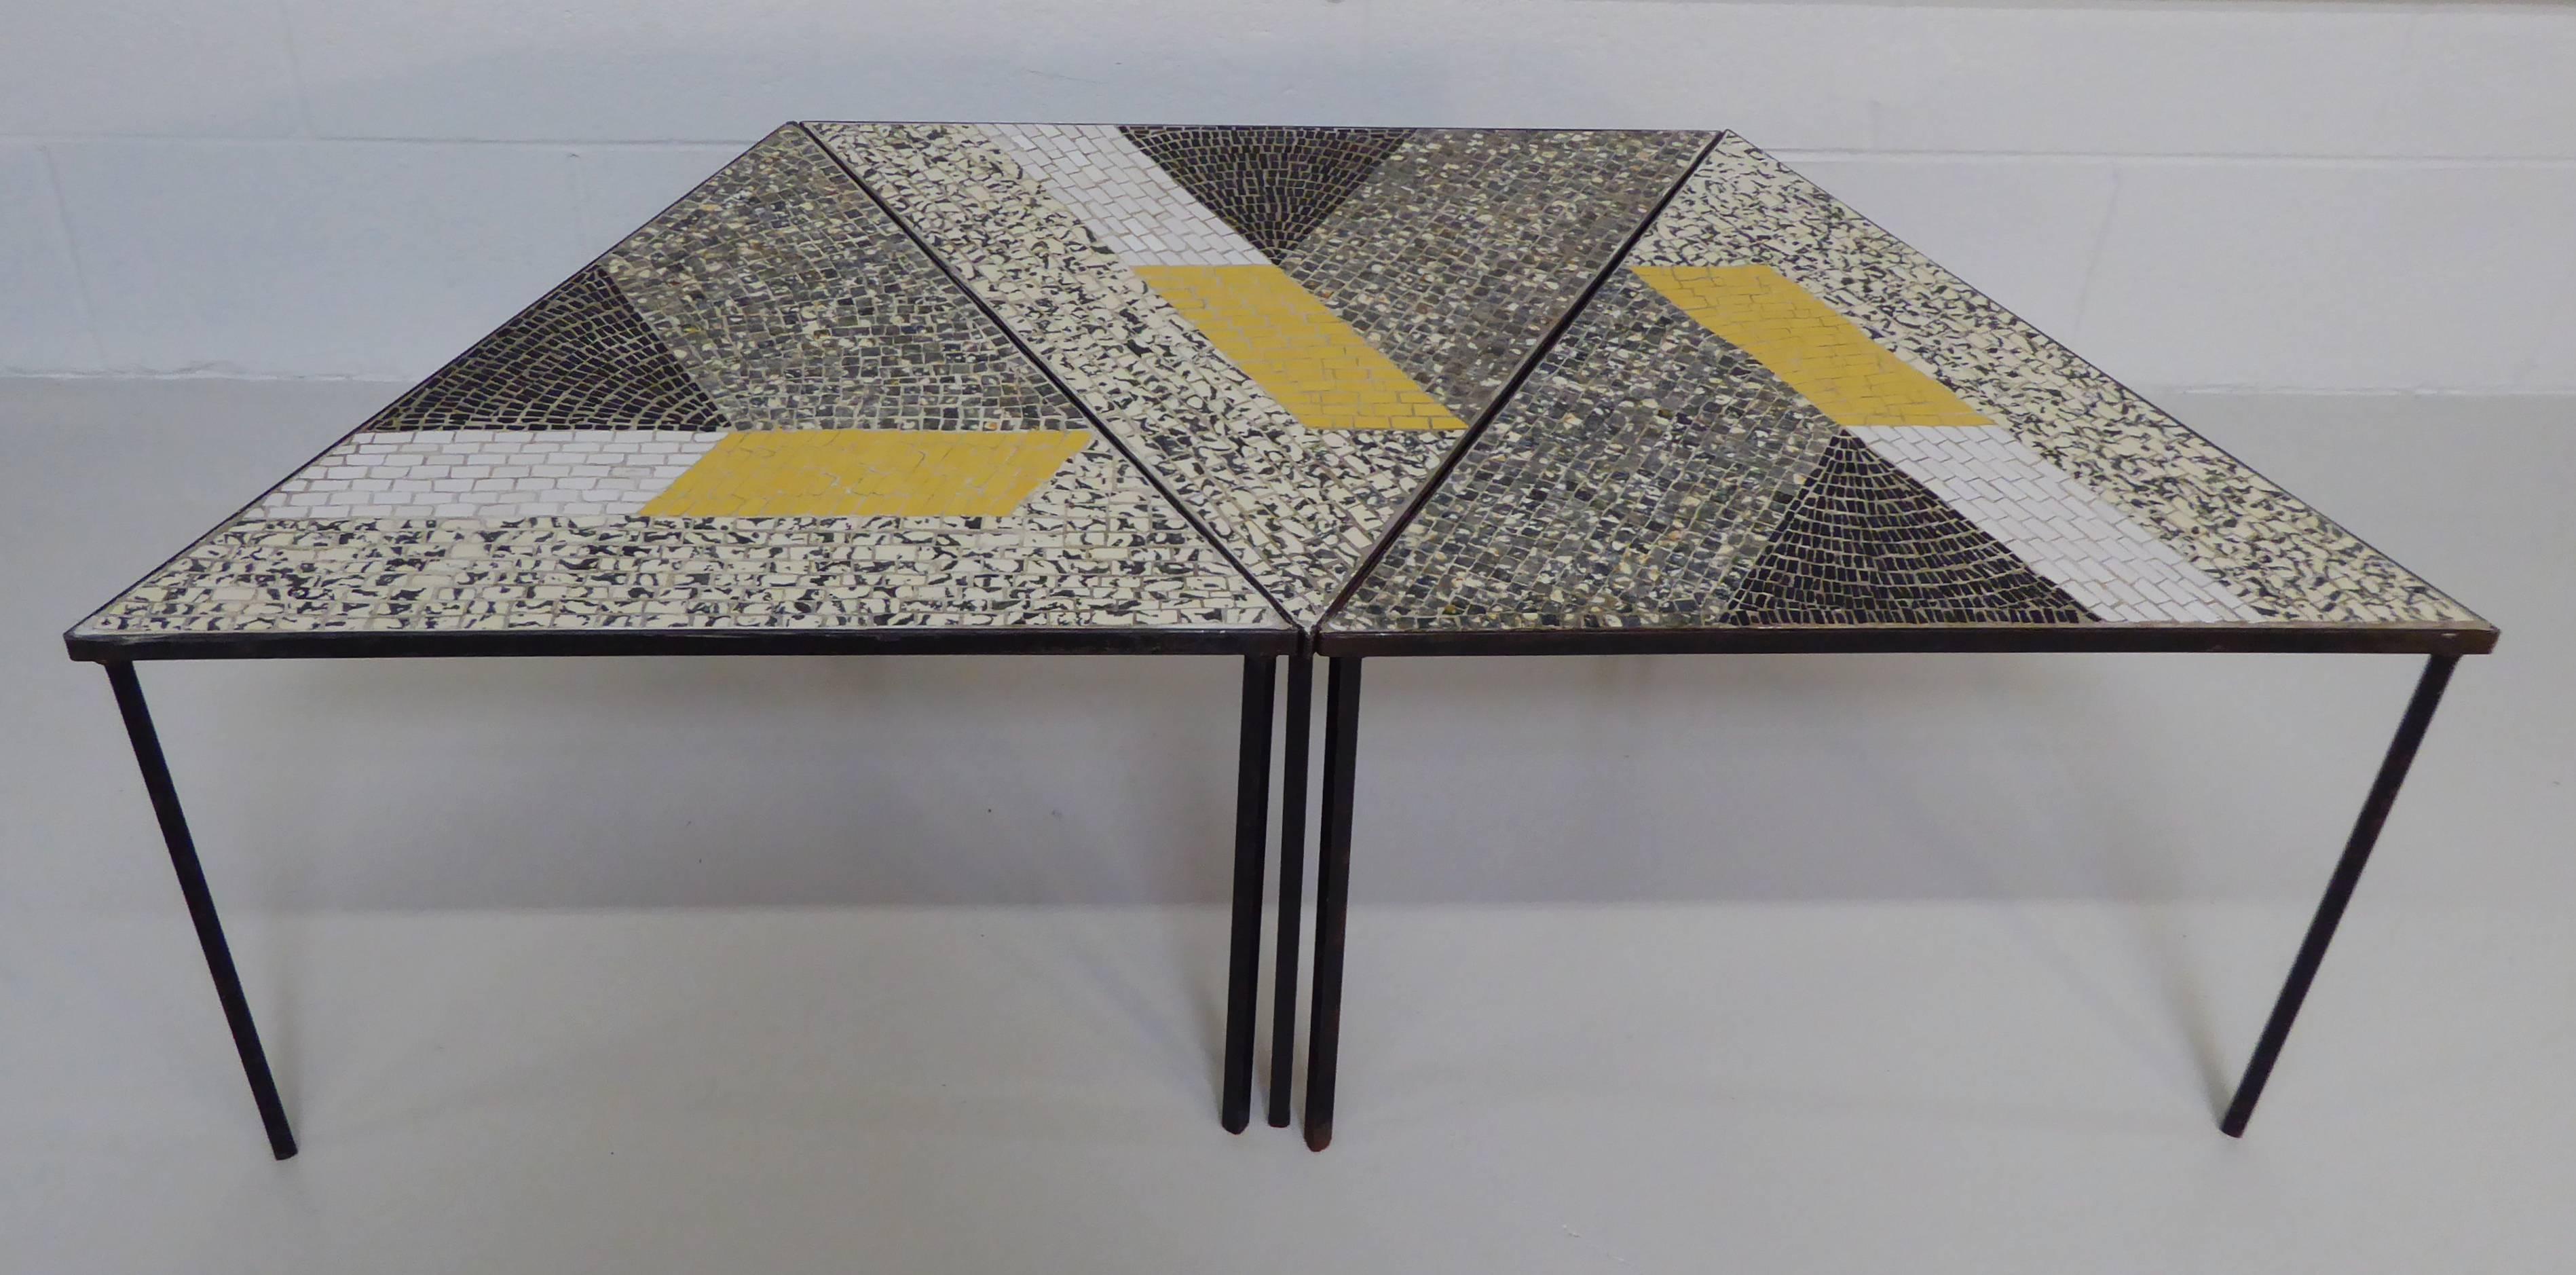 Exceptional handcrafted Mid-Century Modern Italian mosaic tile occasional tables. Set of three studio tile tables have iron bases with fire glazed tiles set in an abstract geometric pattern. Triangular shape allows for a Miriad of